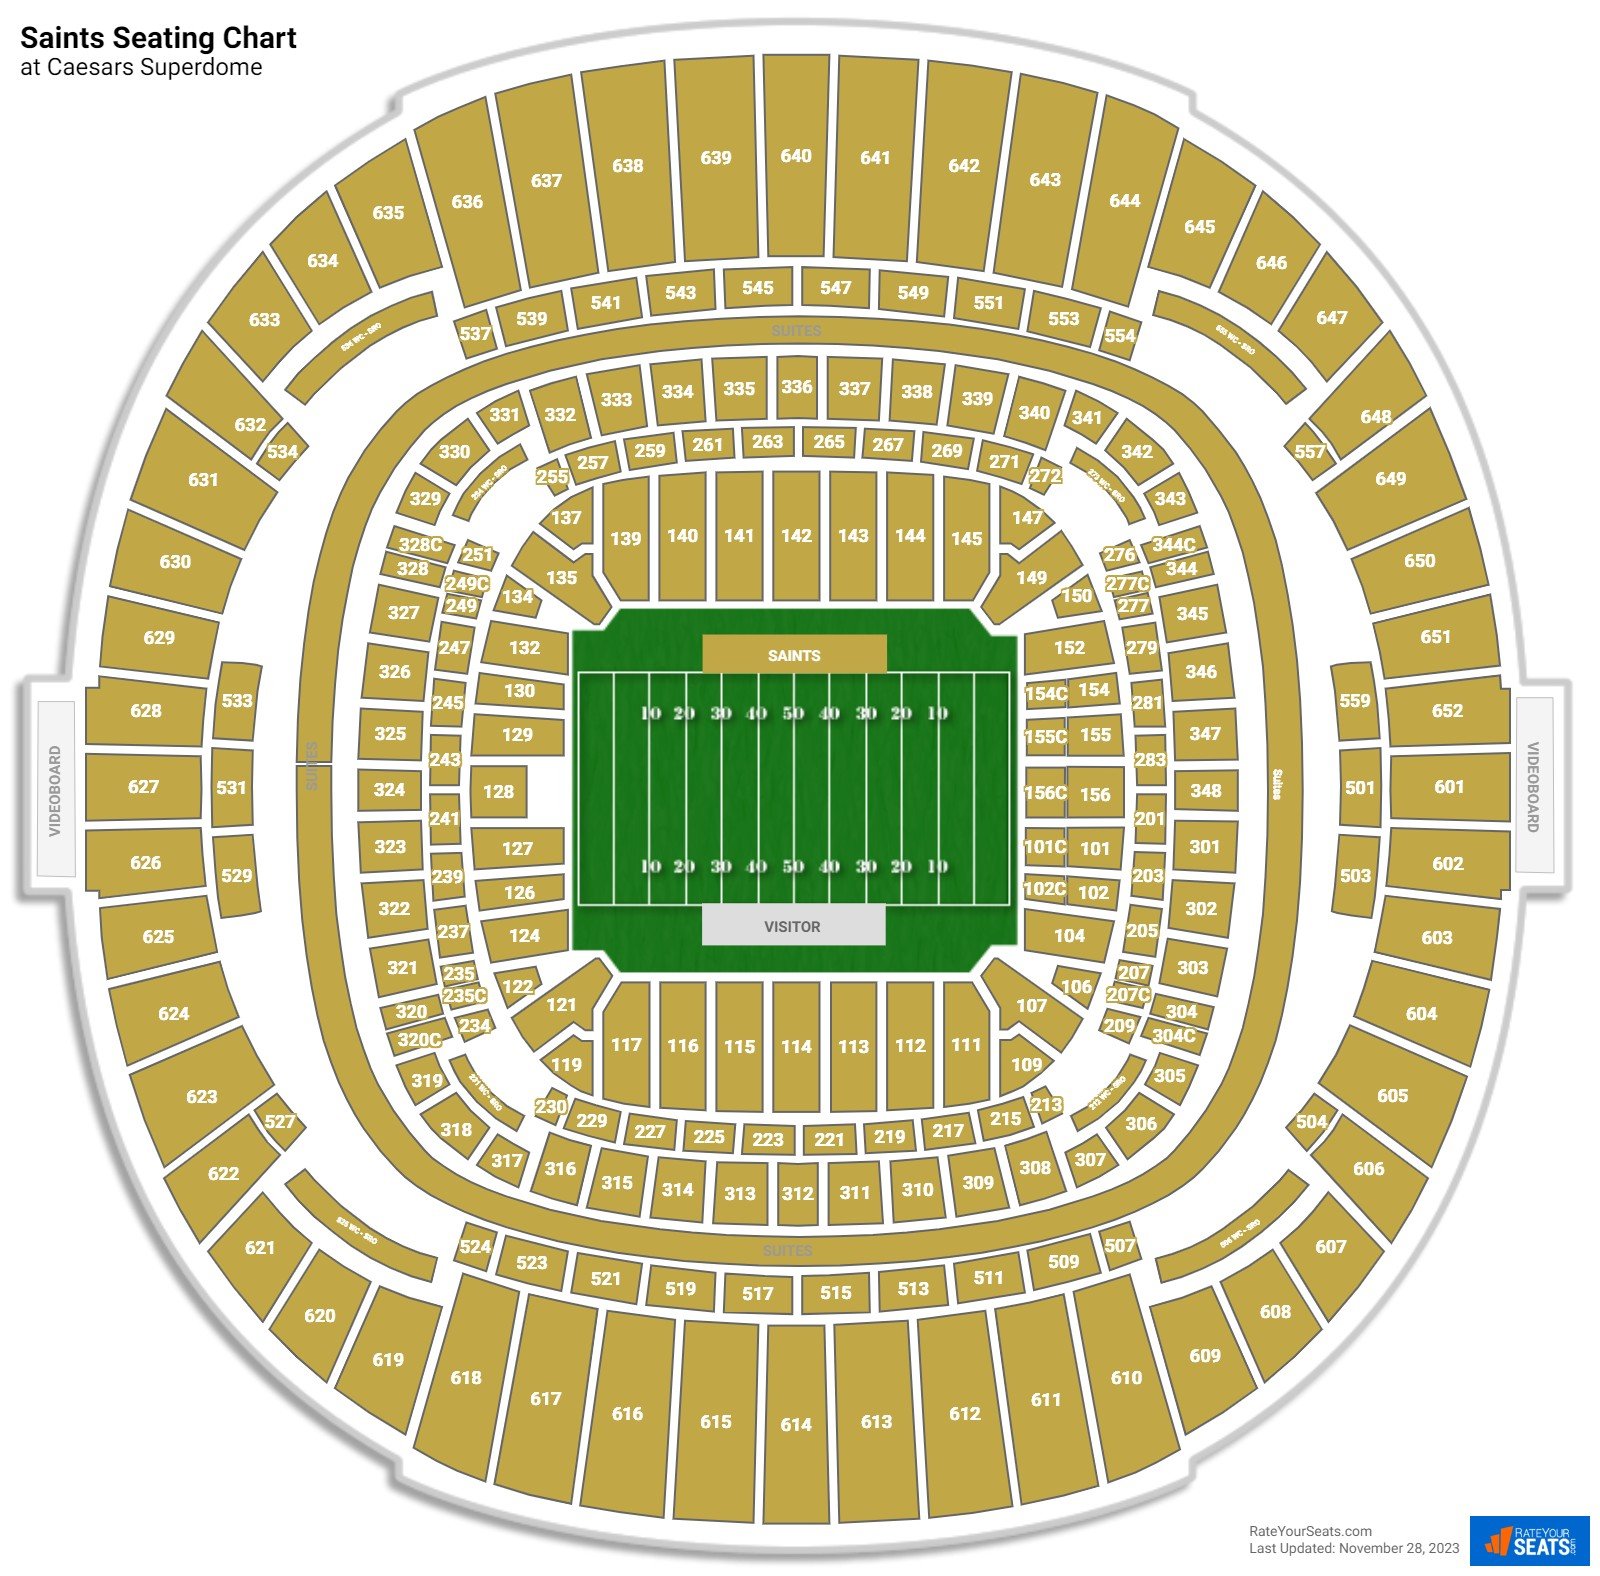 New Orleans Saints Seating Chart at Caesars Superdome